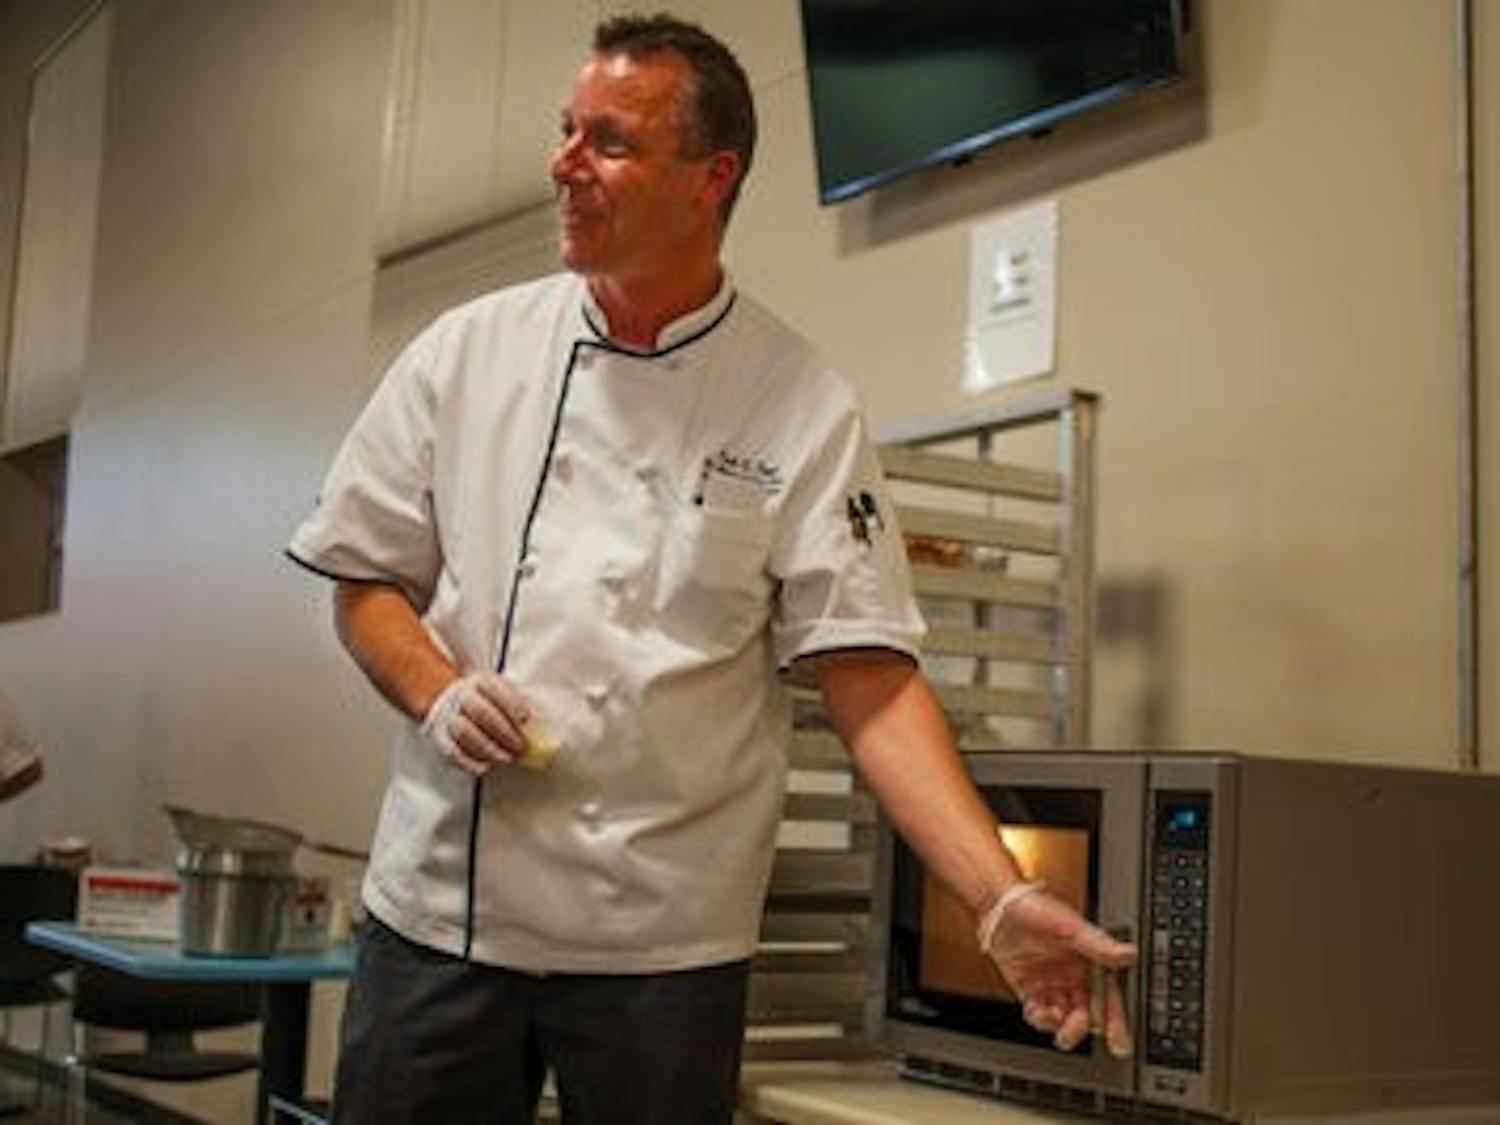 Emil Topel, senior executive chef of Chartwells, teaches students how to eat healthy and locally. (Kenny Moss | Photographer)